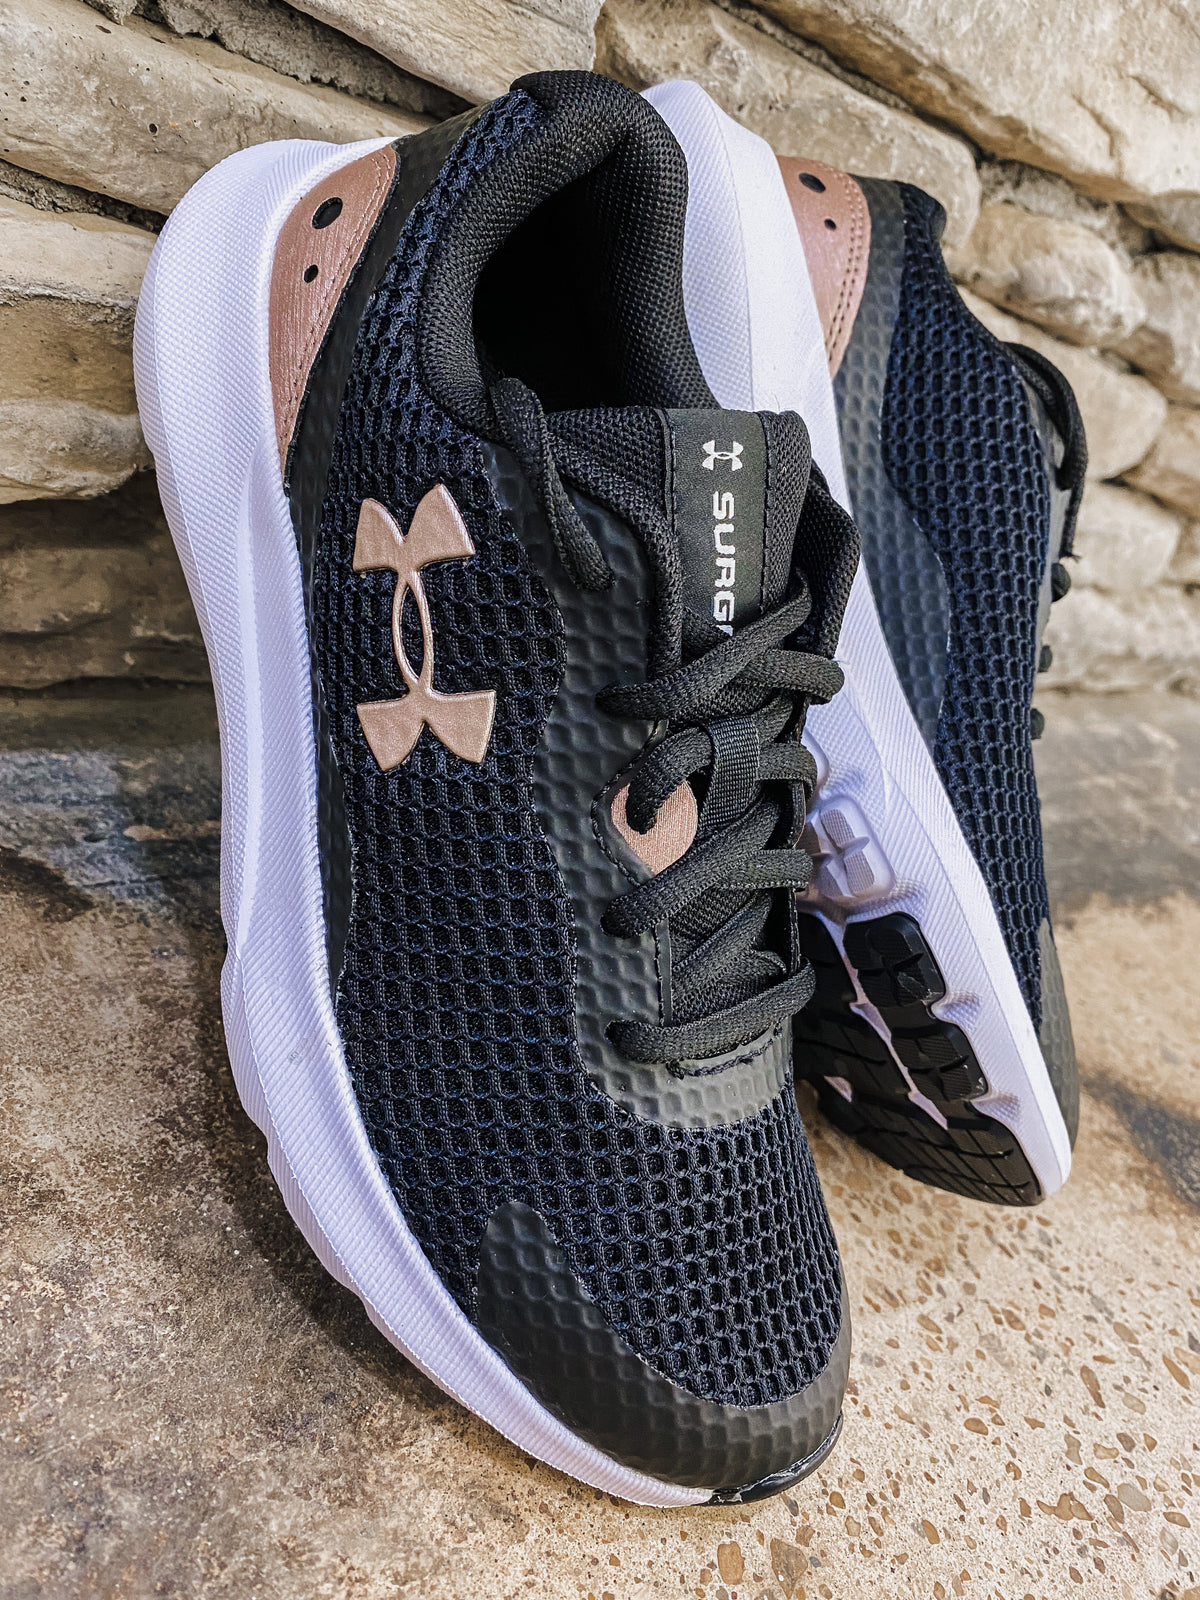 Under Armour Women’s Surge 3 Running Shoes